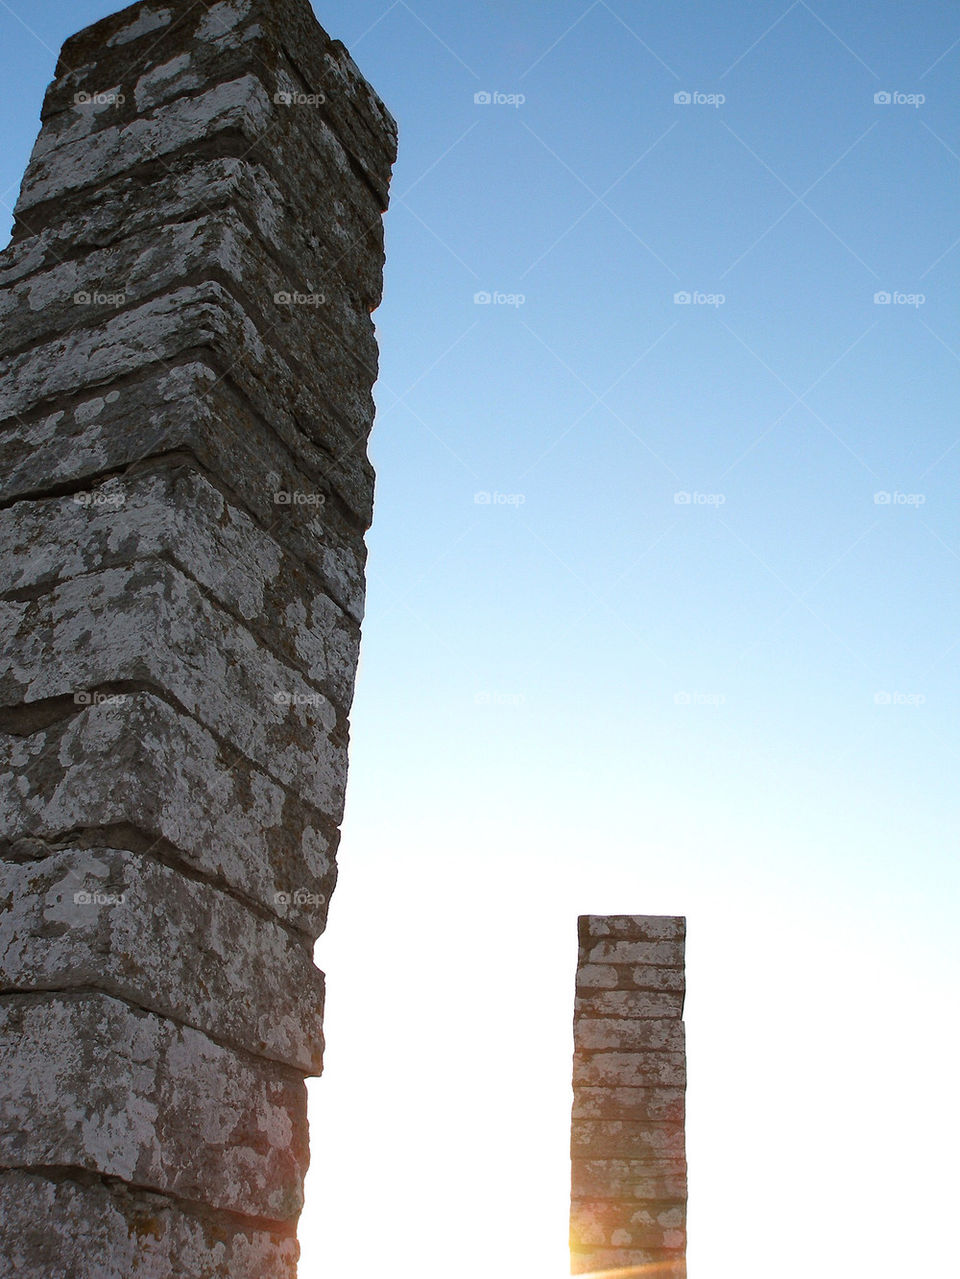 gotland structure stone age by linque